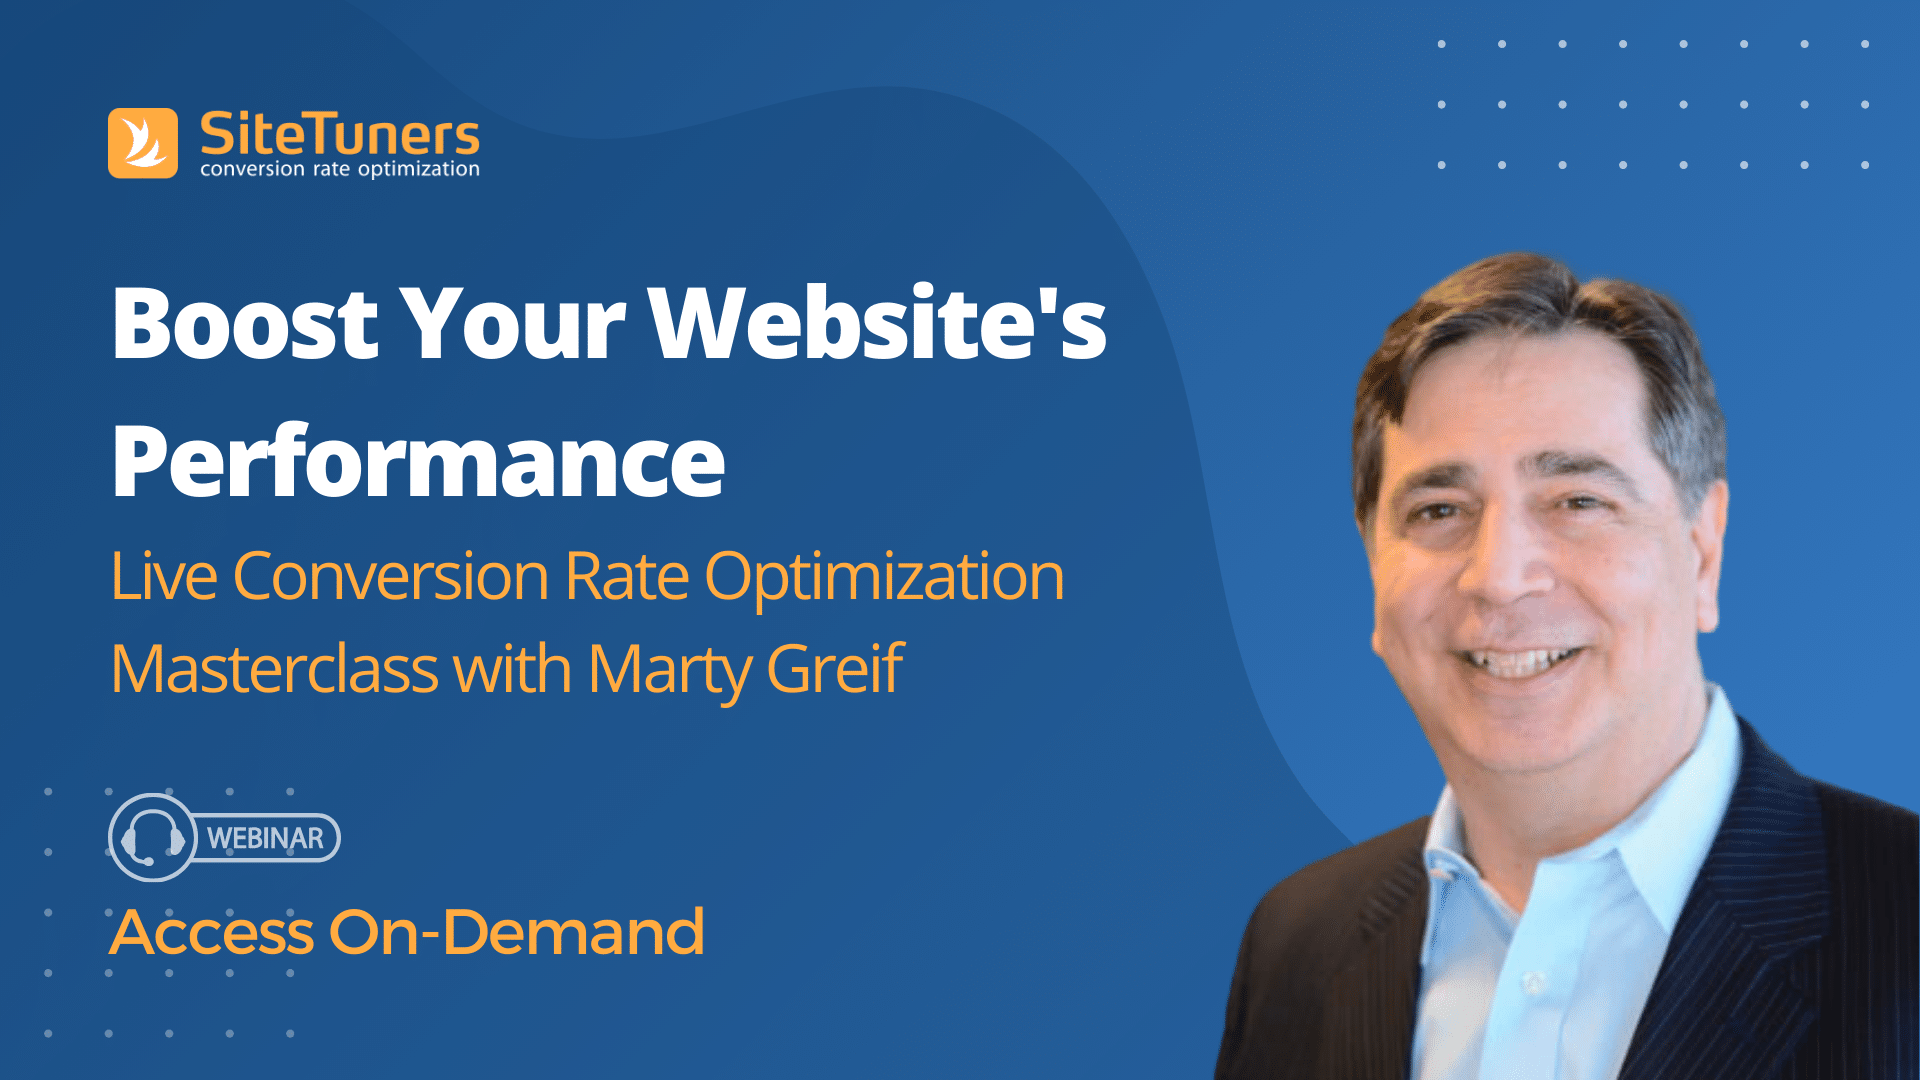 Marty Greif's webinar about optimizing website for converisions